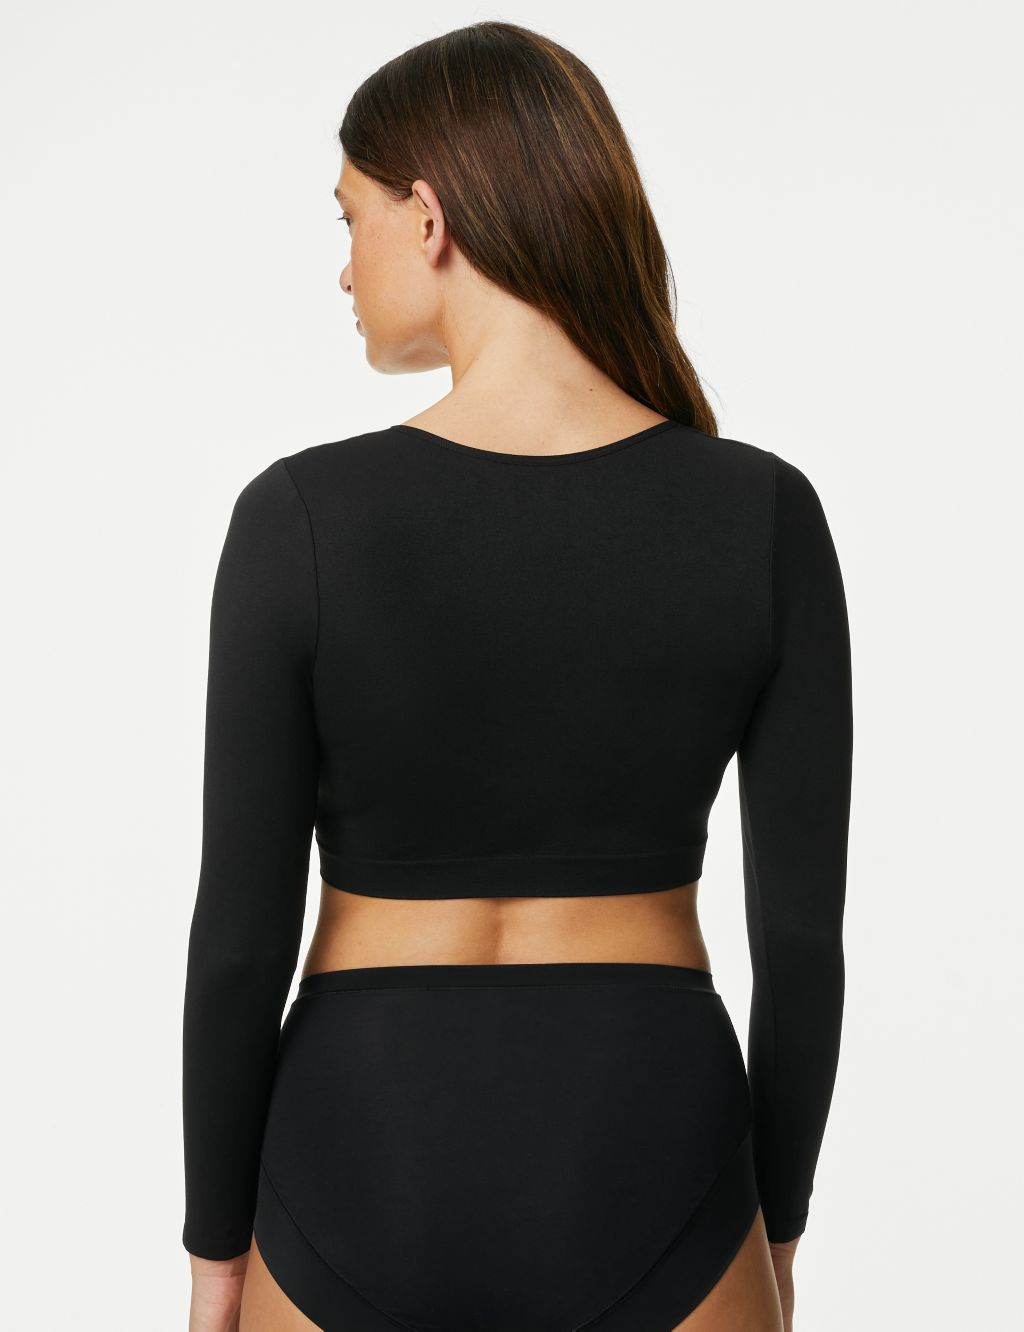 Seamless Smoothing Armwear Top 4 of 6